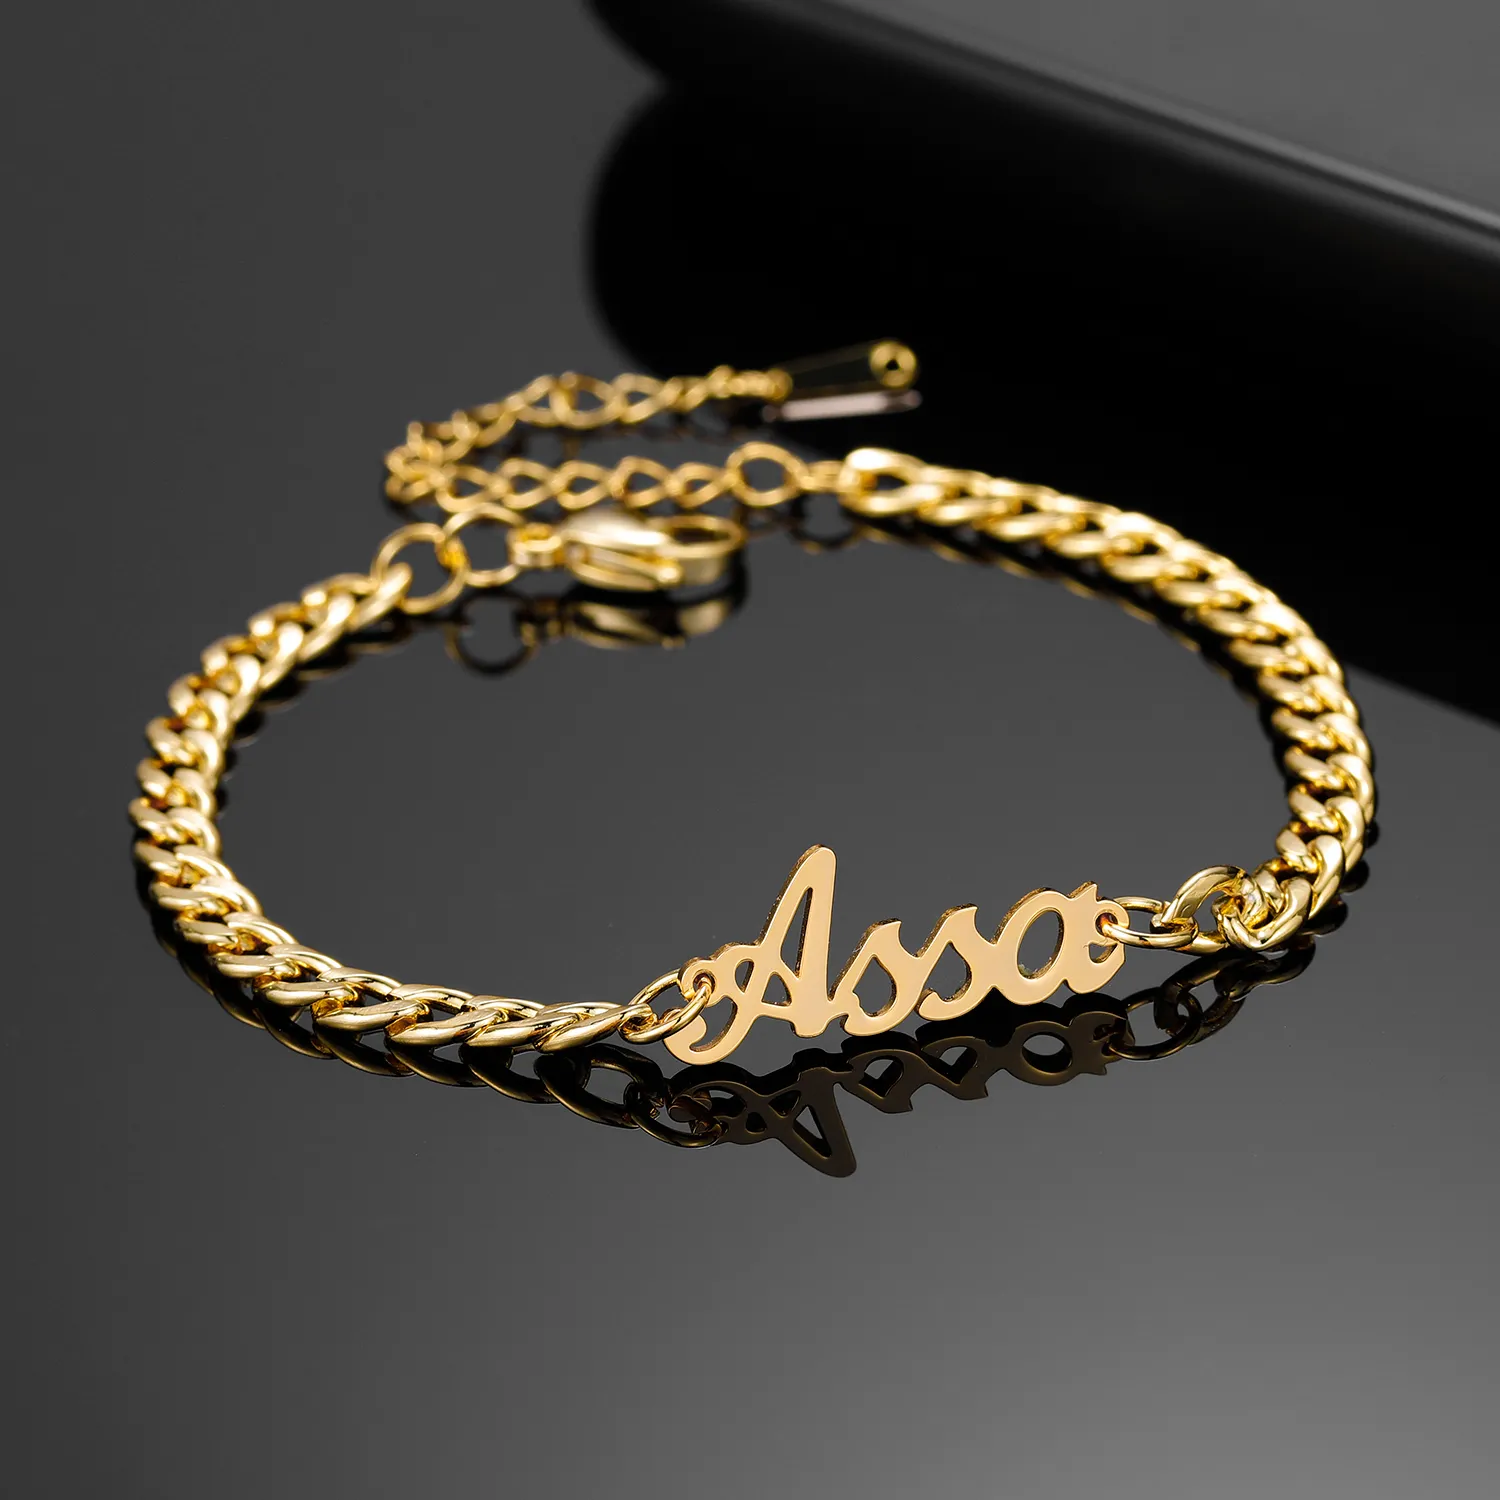 Cuff Personalized Name Bracelet 18K Gold Plated Stainless Steel Crimp Chain Customized Bracelet and Bracelet Handmade Men's Jewelry 230725